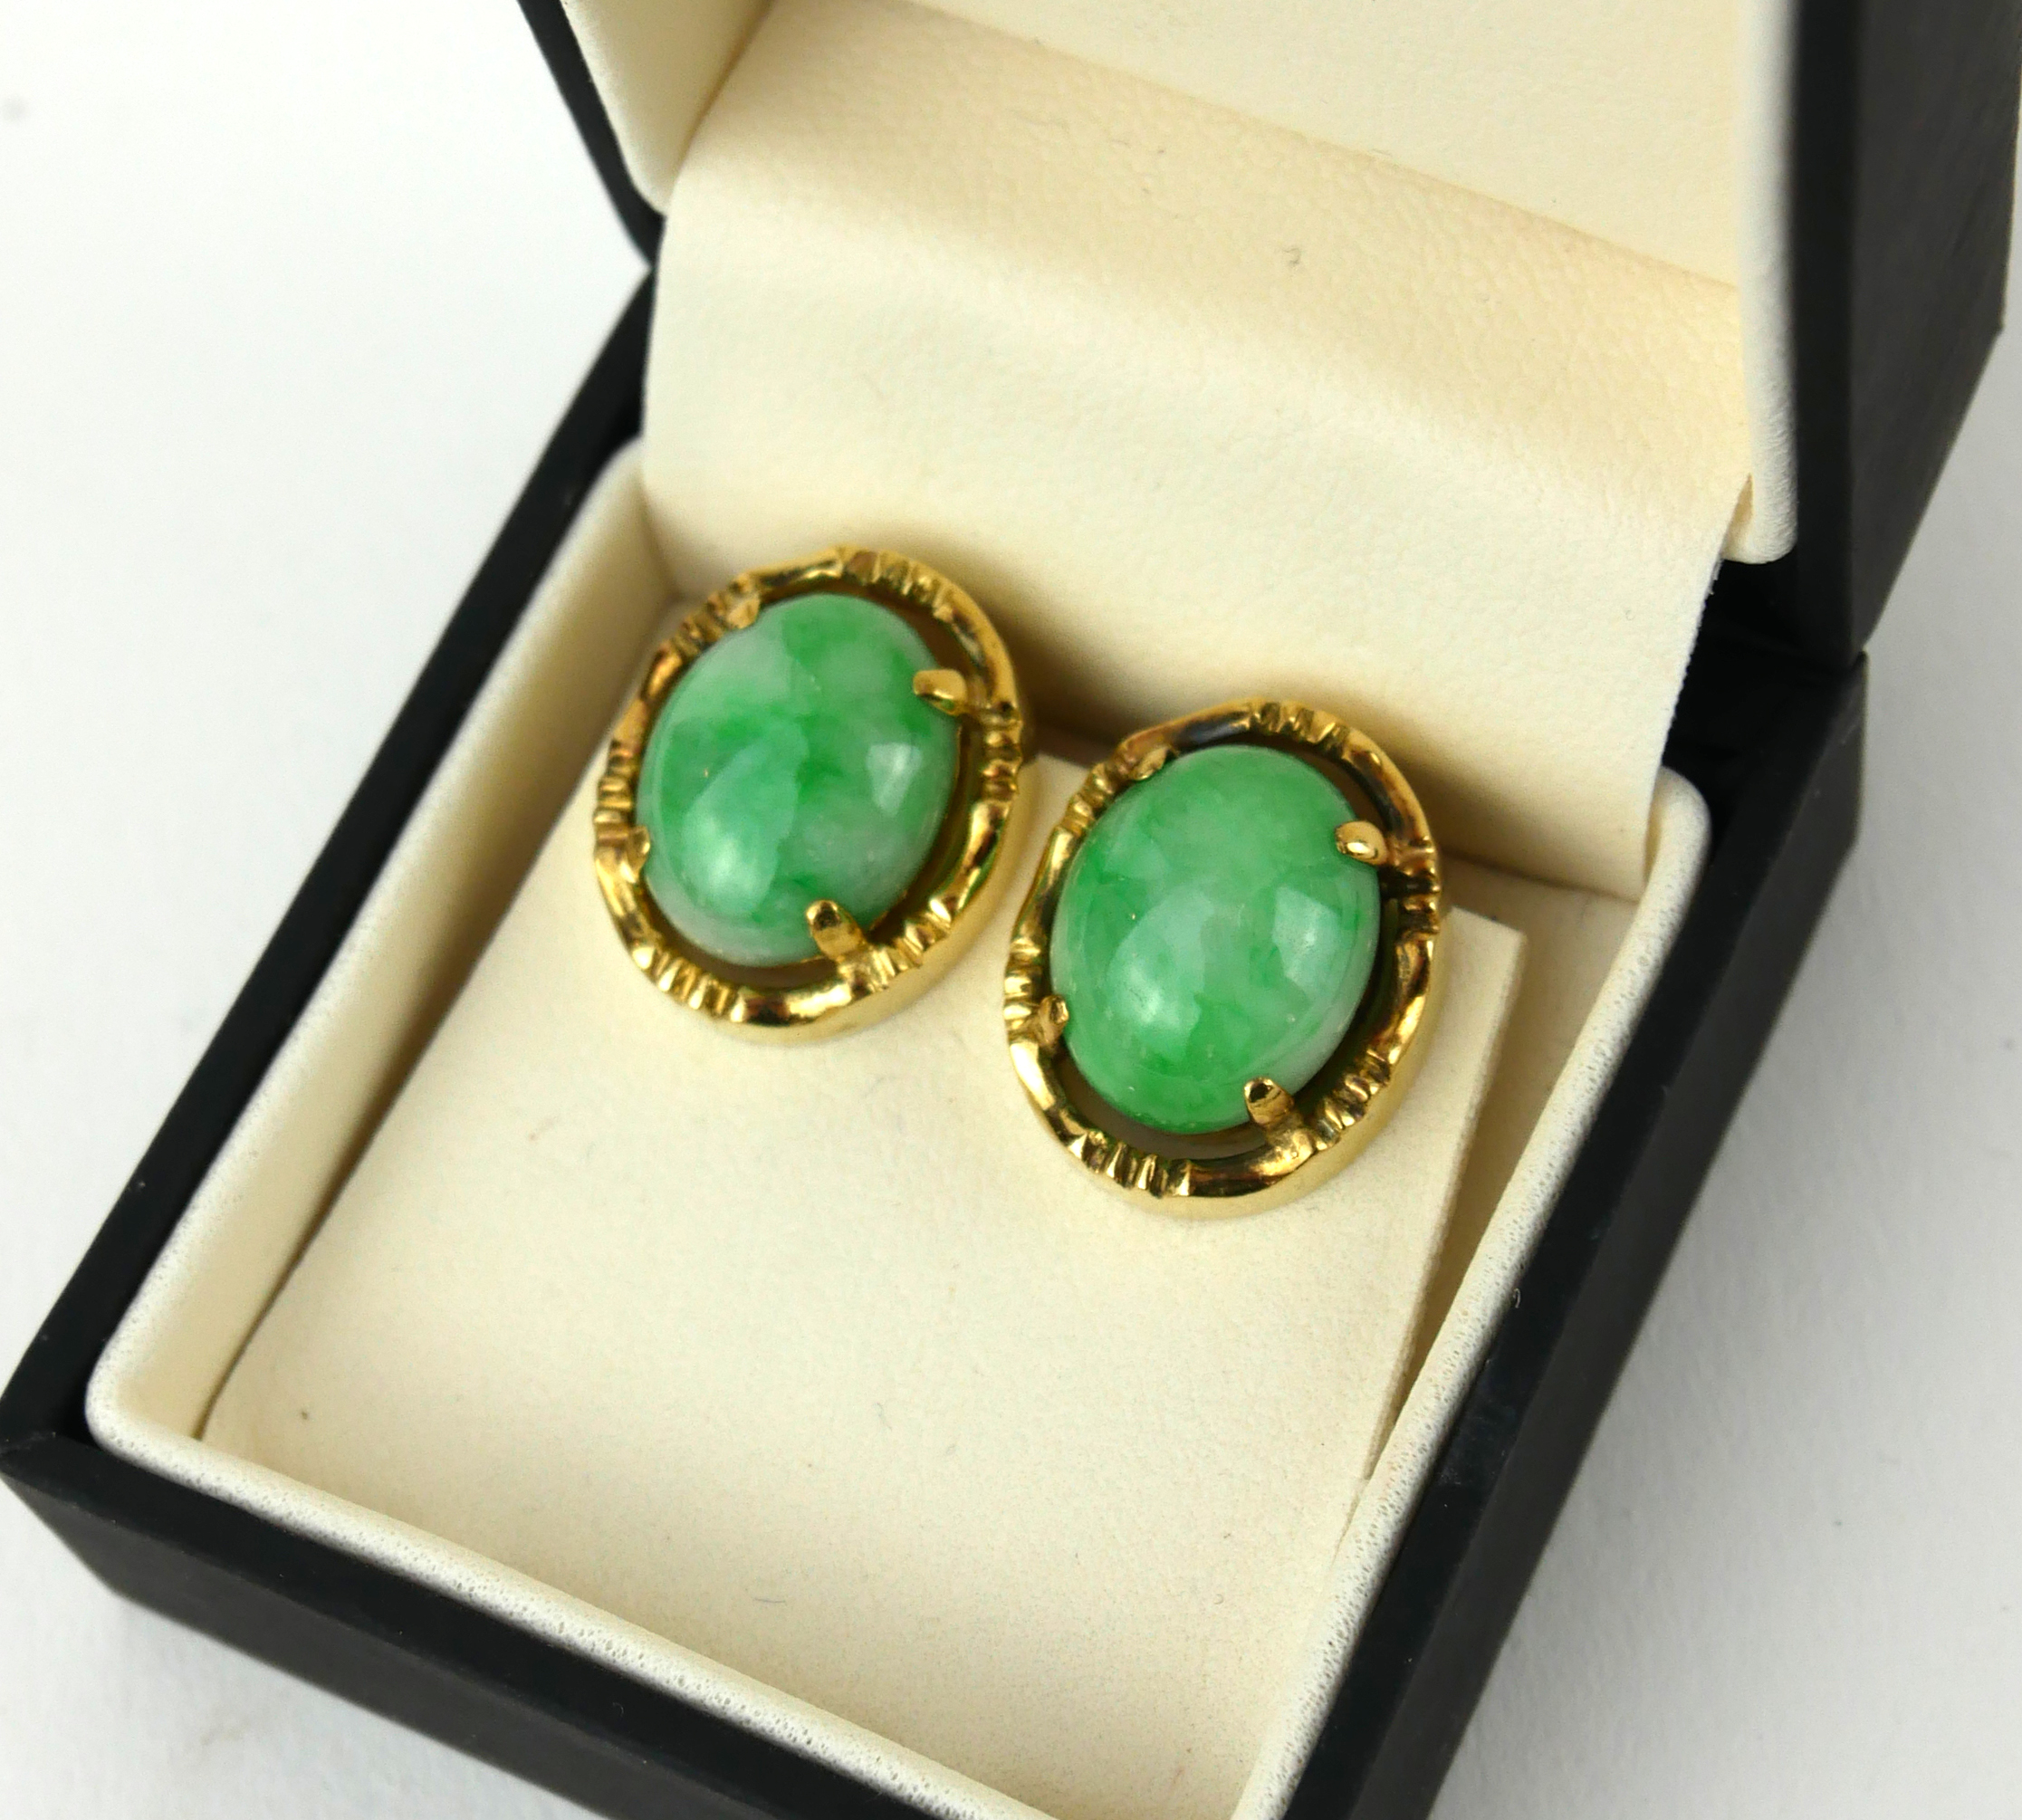 A PAIR OF 18CT GOLD AND OVAL JADE EARRINGS, CIRCA 1950.